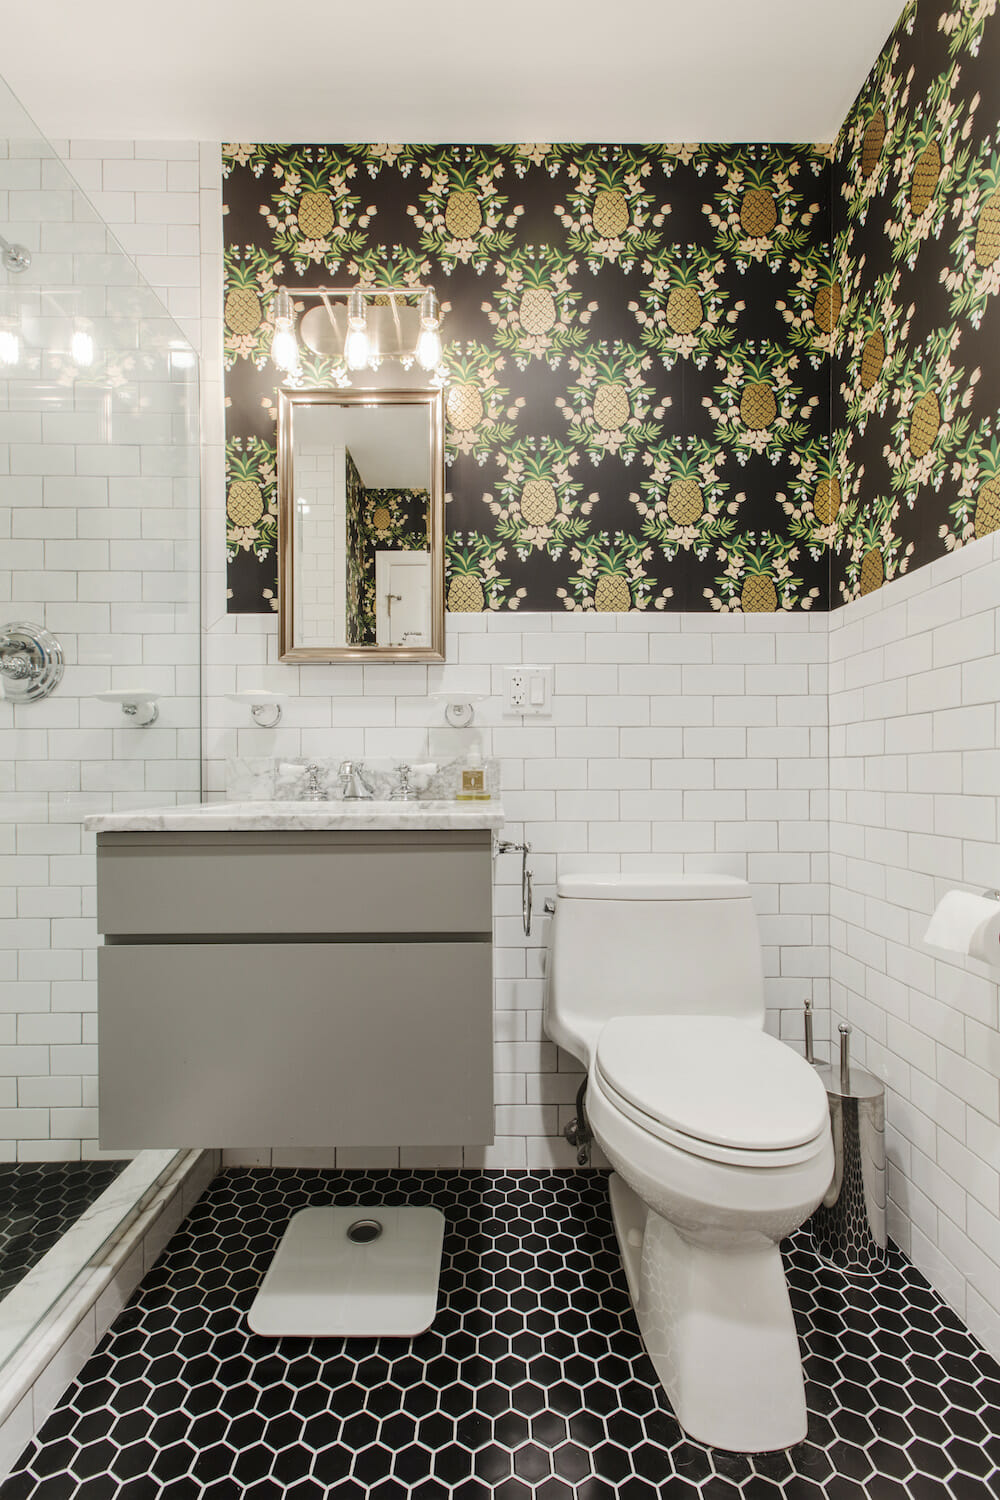 The corner of a bathroom with black hex floor tile and gilt pineapple wallpaper.